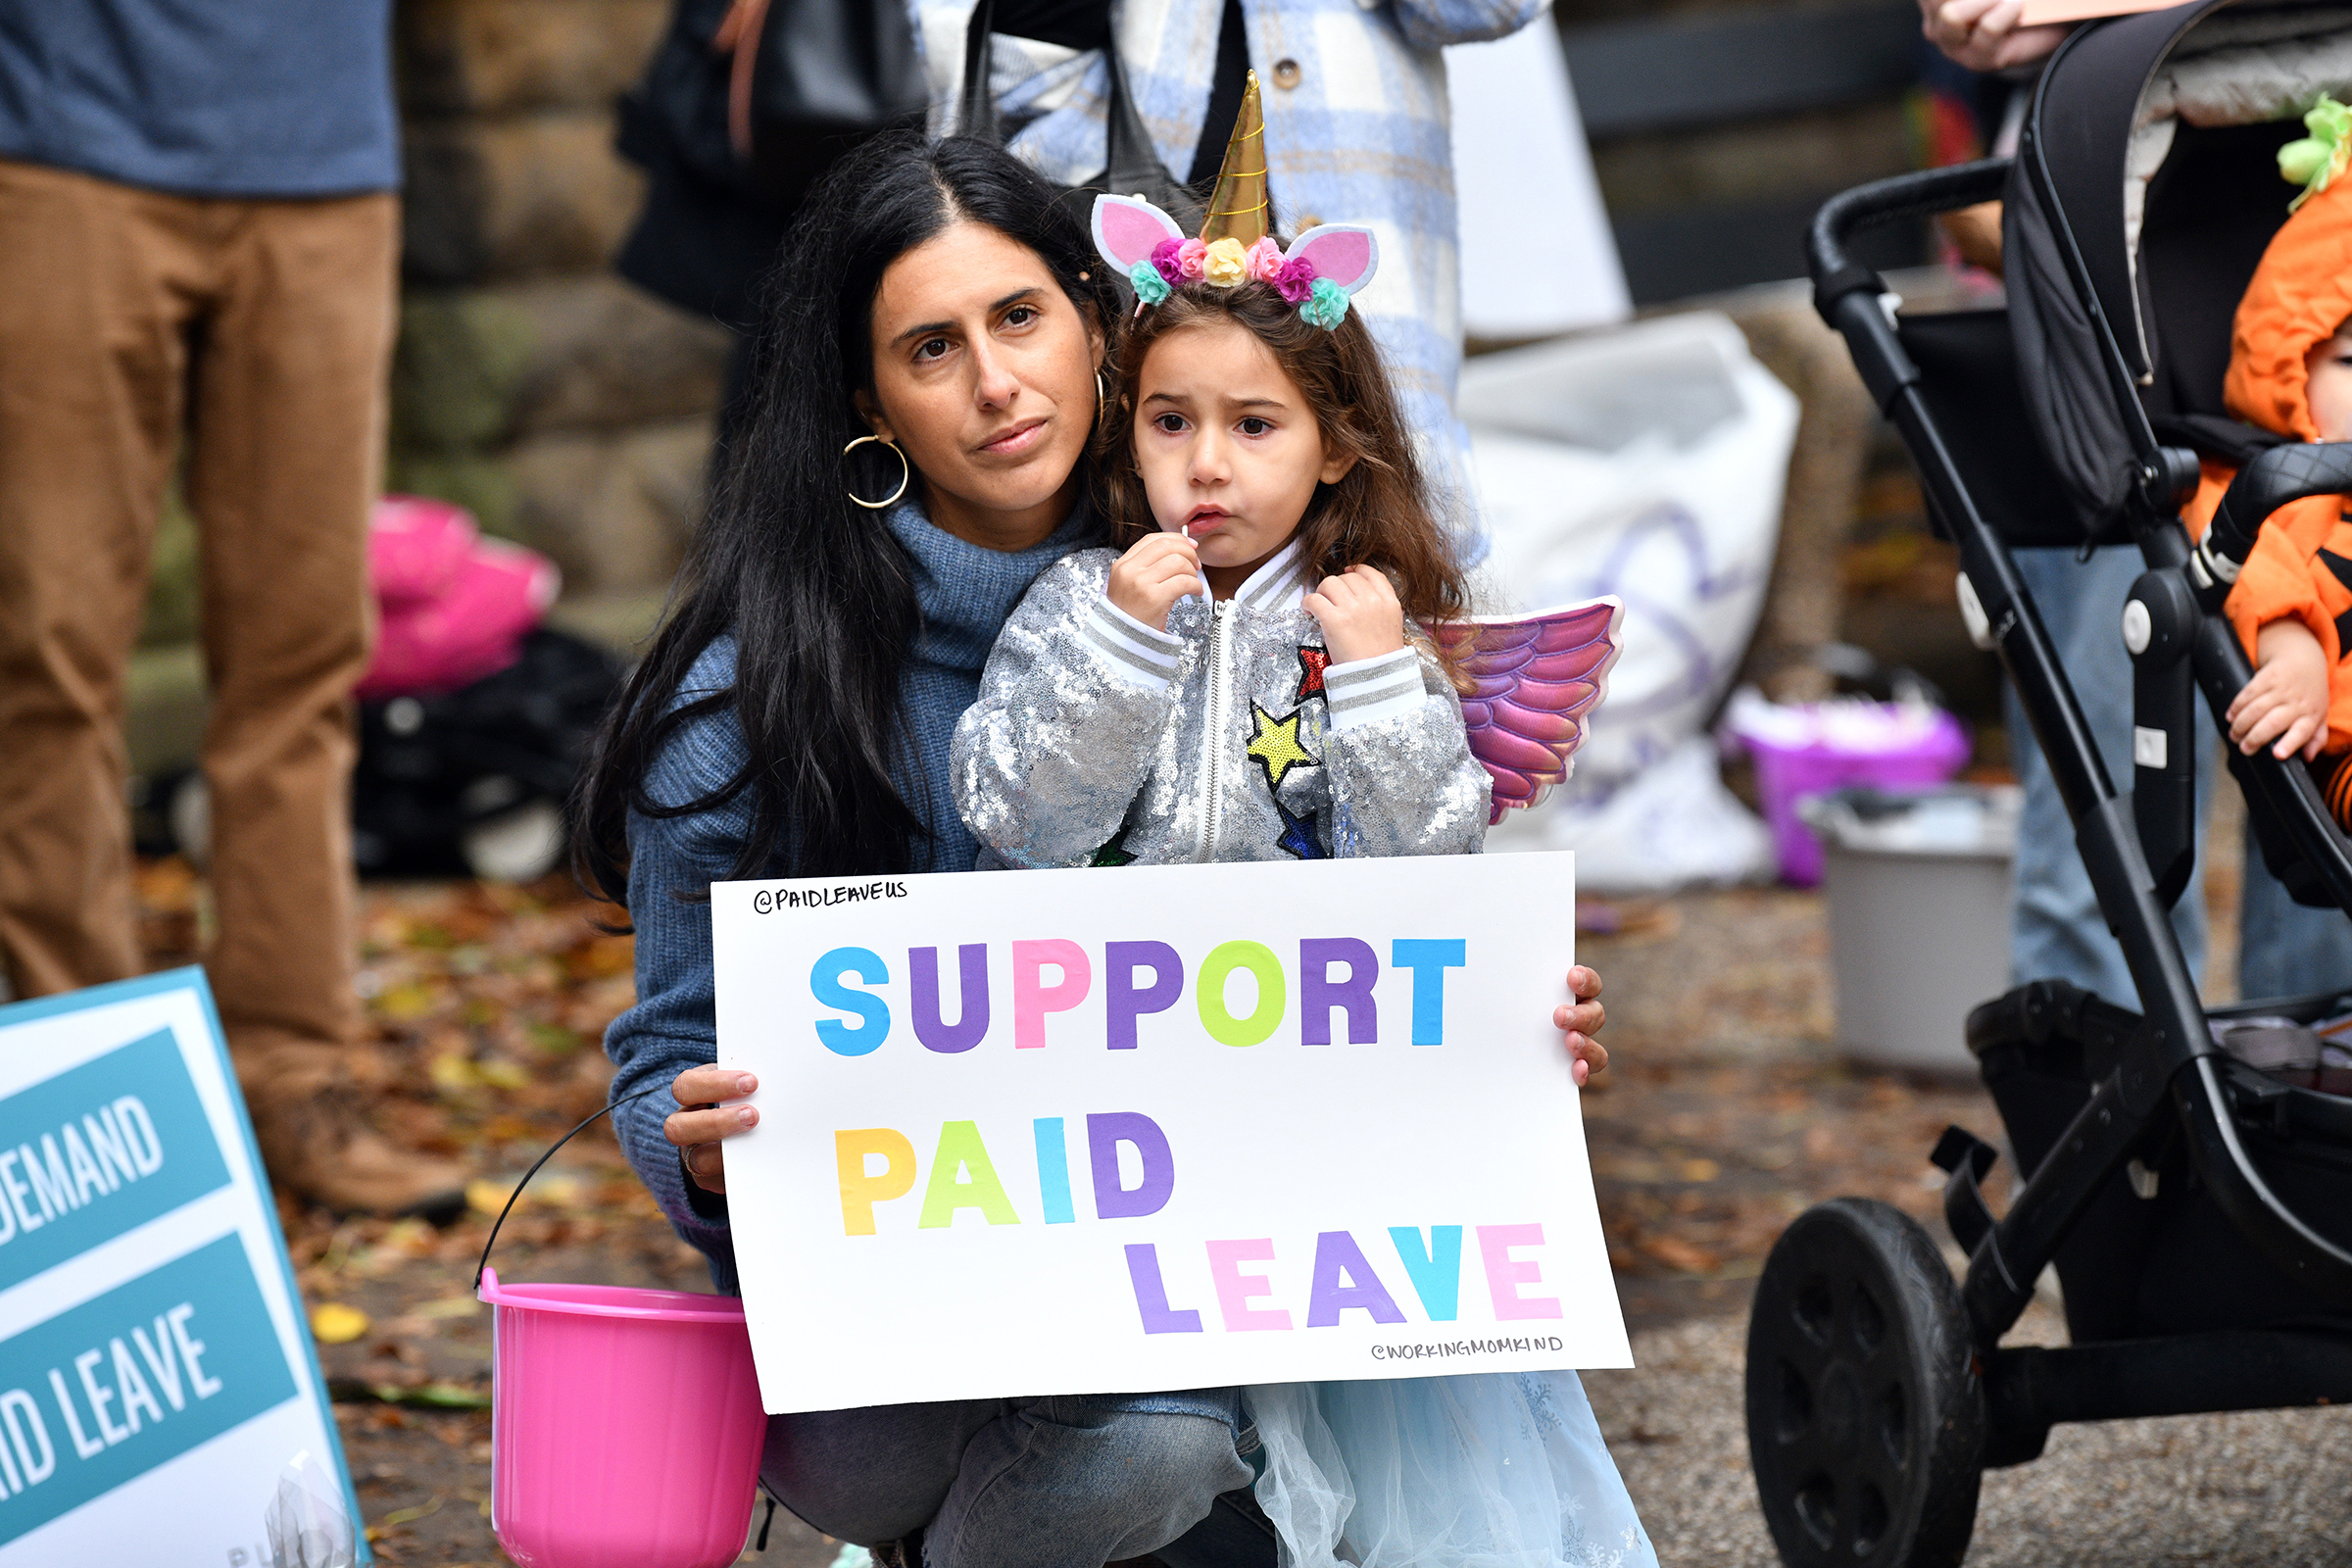 New York City families attend the NYC For Paid Leave Rally at Grand Army Plaza on October 31, 2021 in Brooklyn, New York. (Bryan Bedder—Getty Images/NYC for Paid Leave)